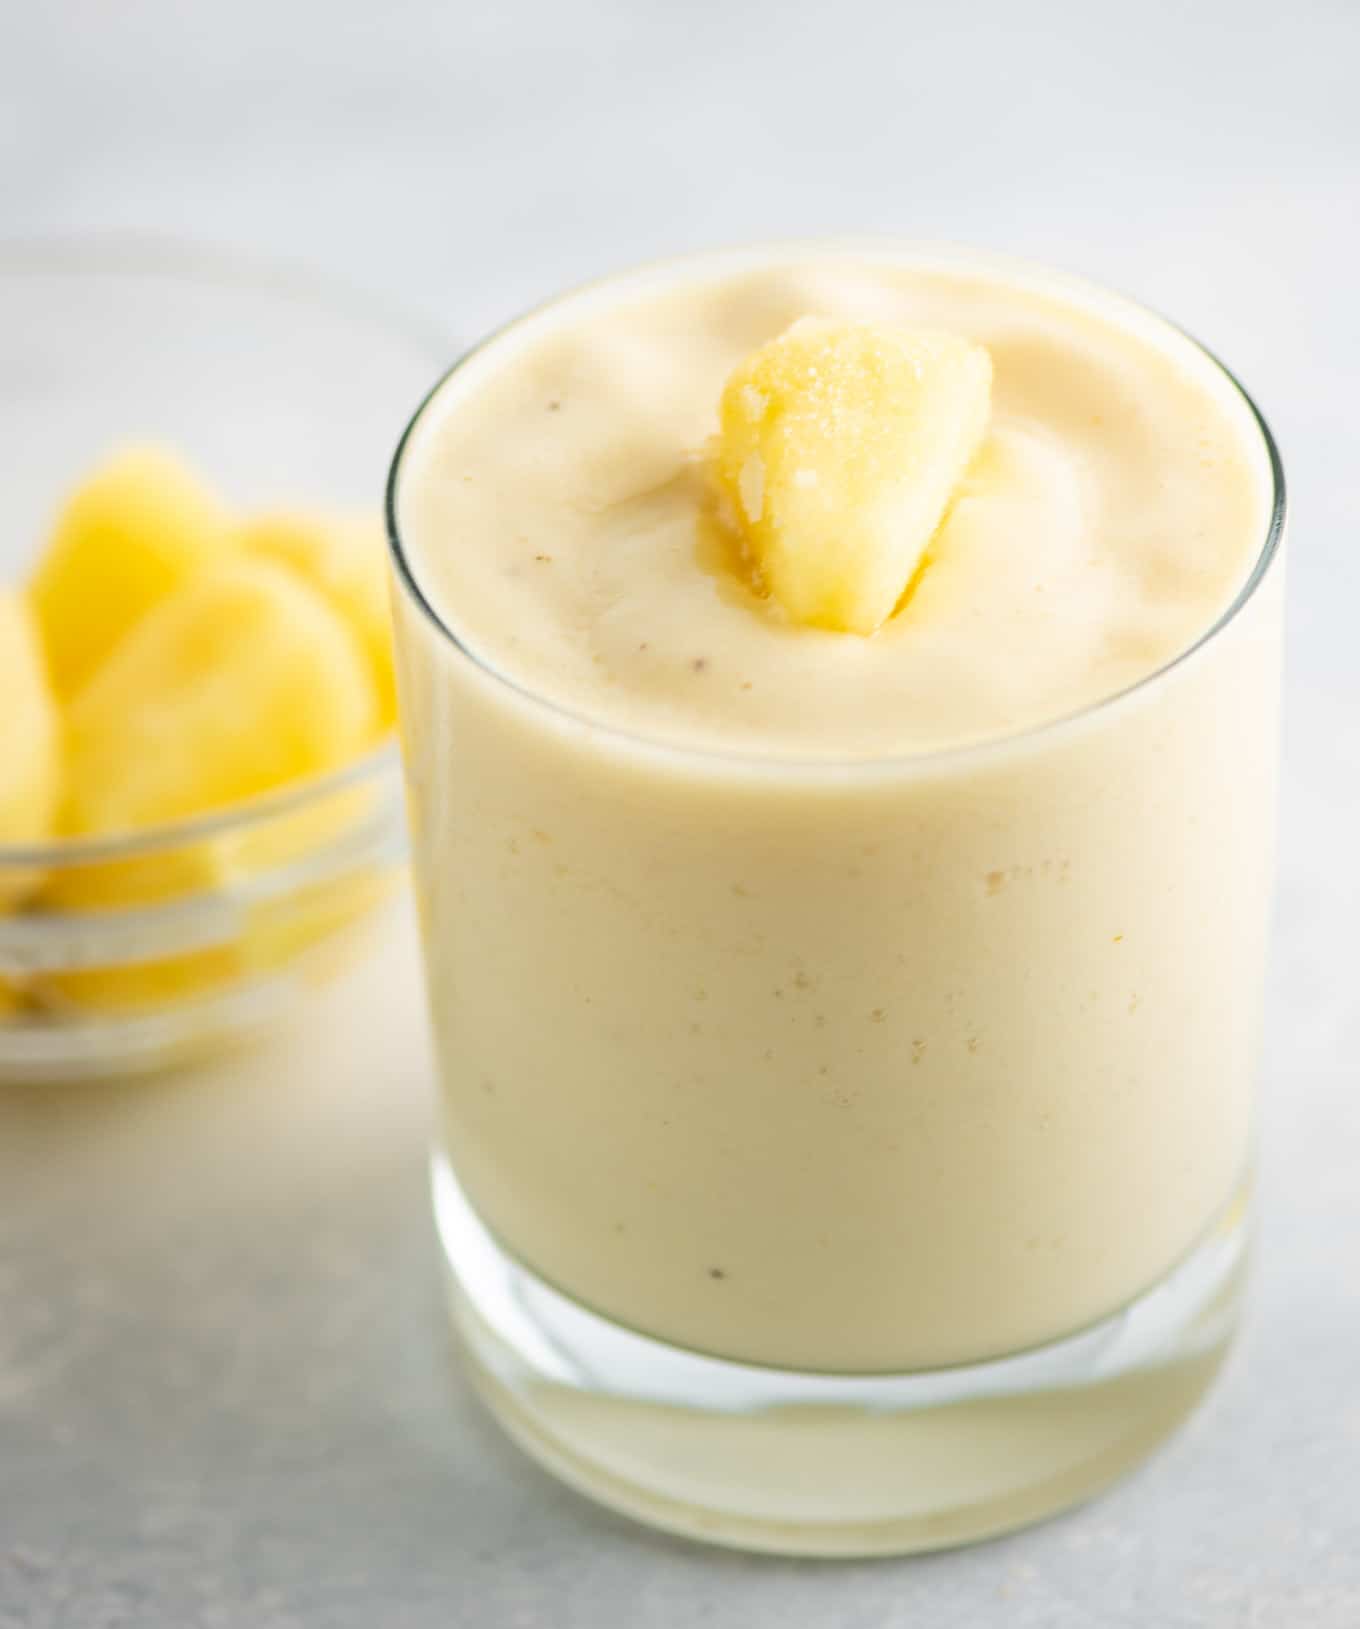 frosty pineapple smoothie in a glass